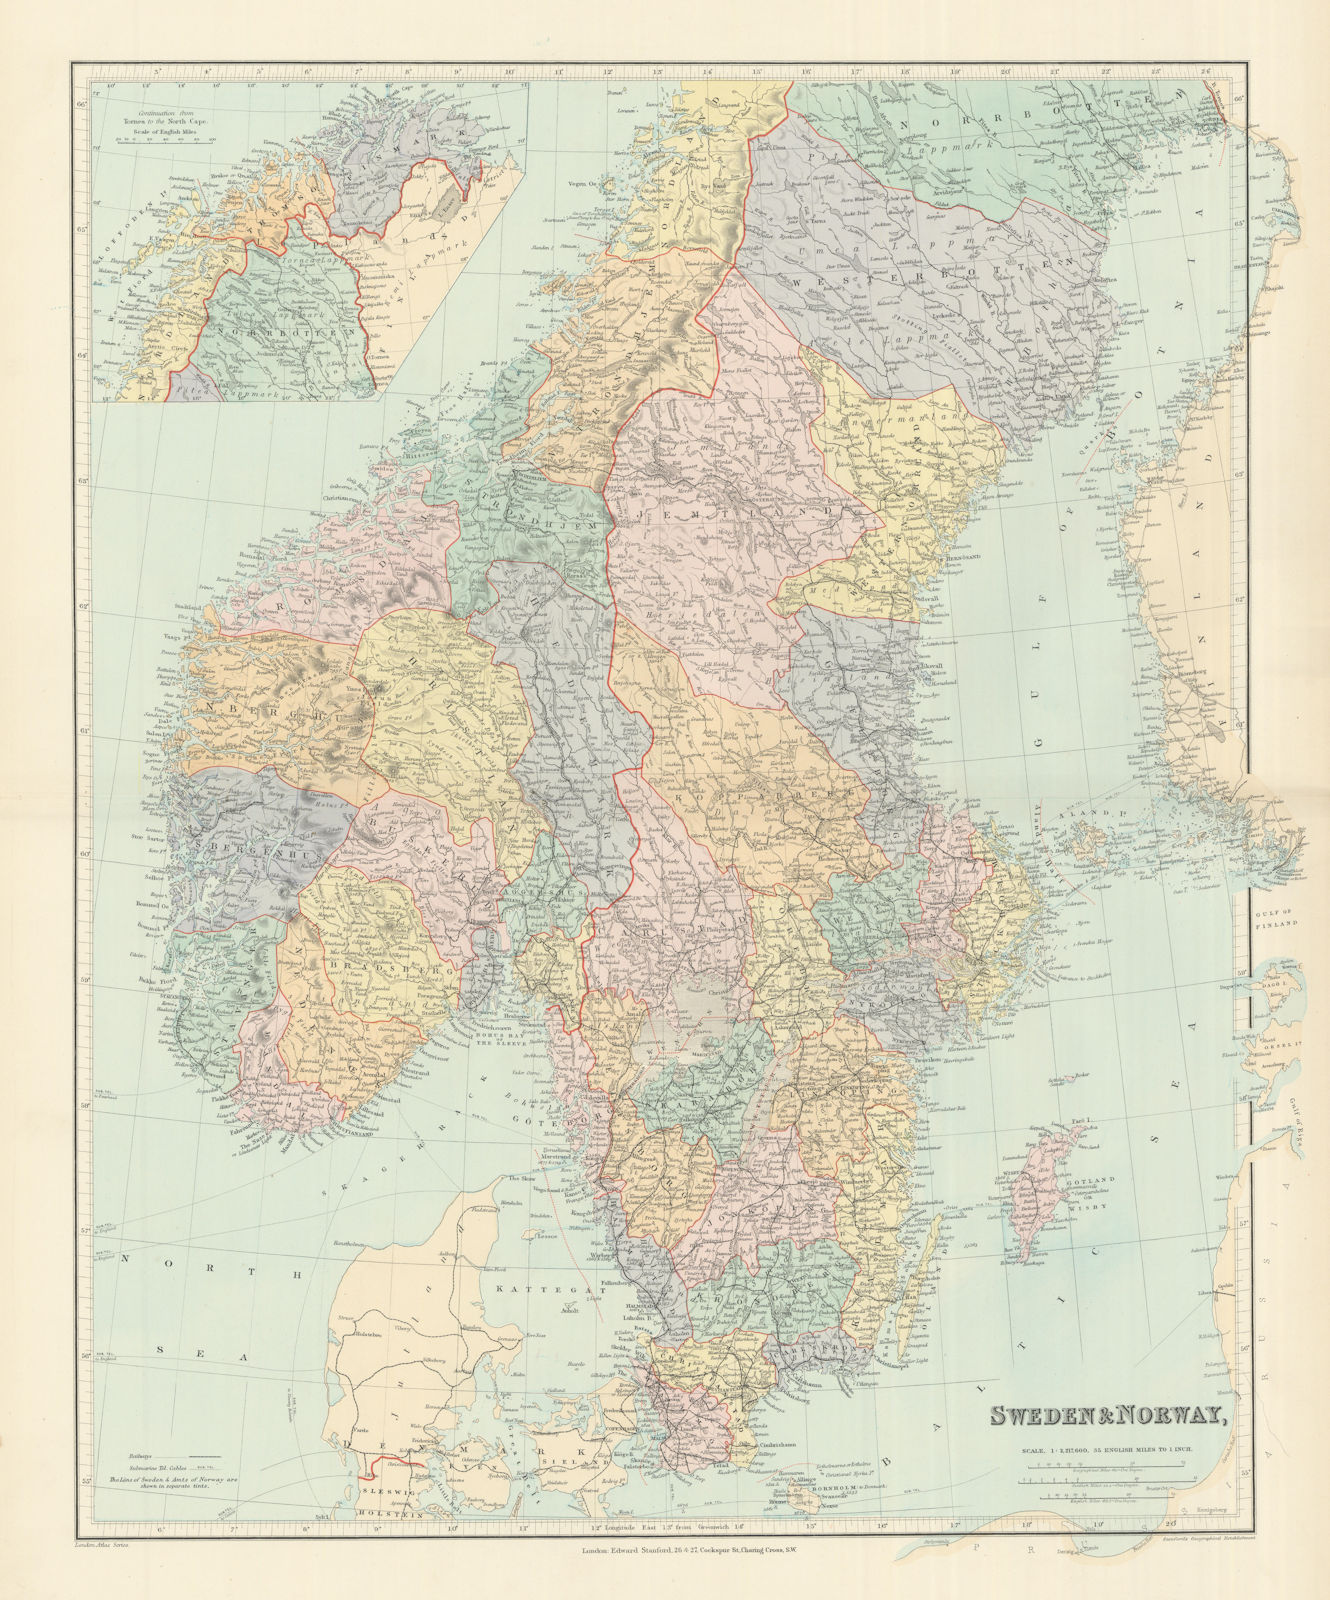 Scandinavia physical mountains fjords glaciers. Sweden Norway. STANFORD 1894 map